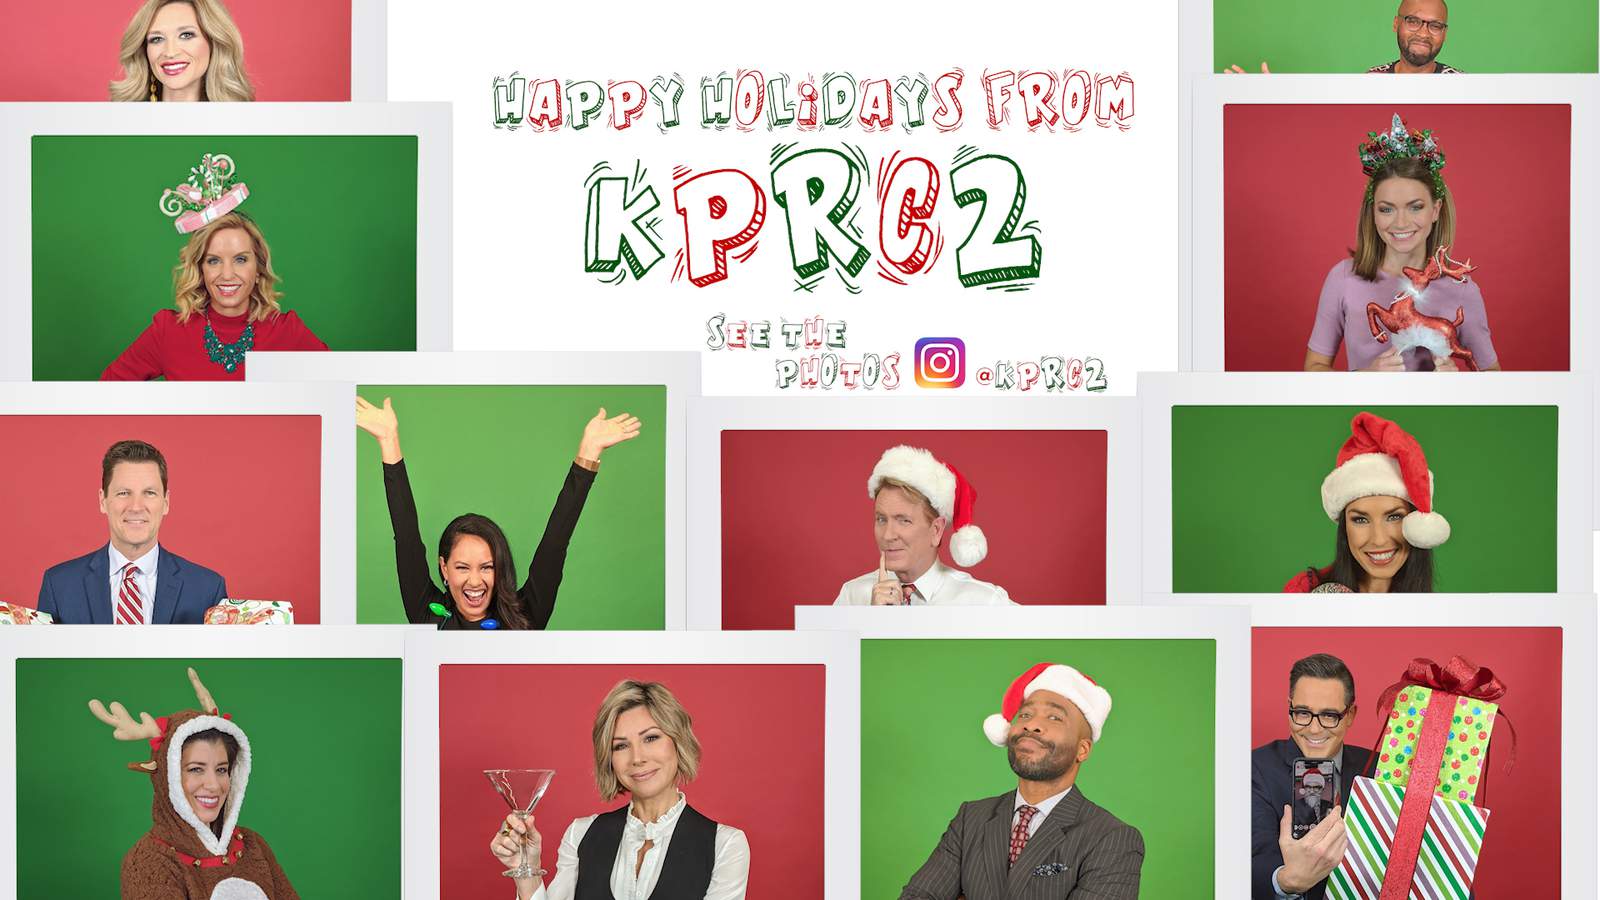 Spread some holiday cheer, vote for your favorite KPRC 2 photo